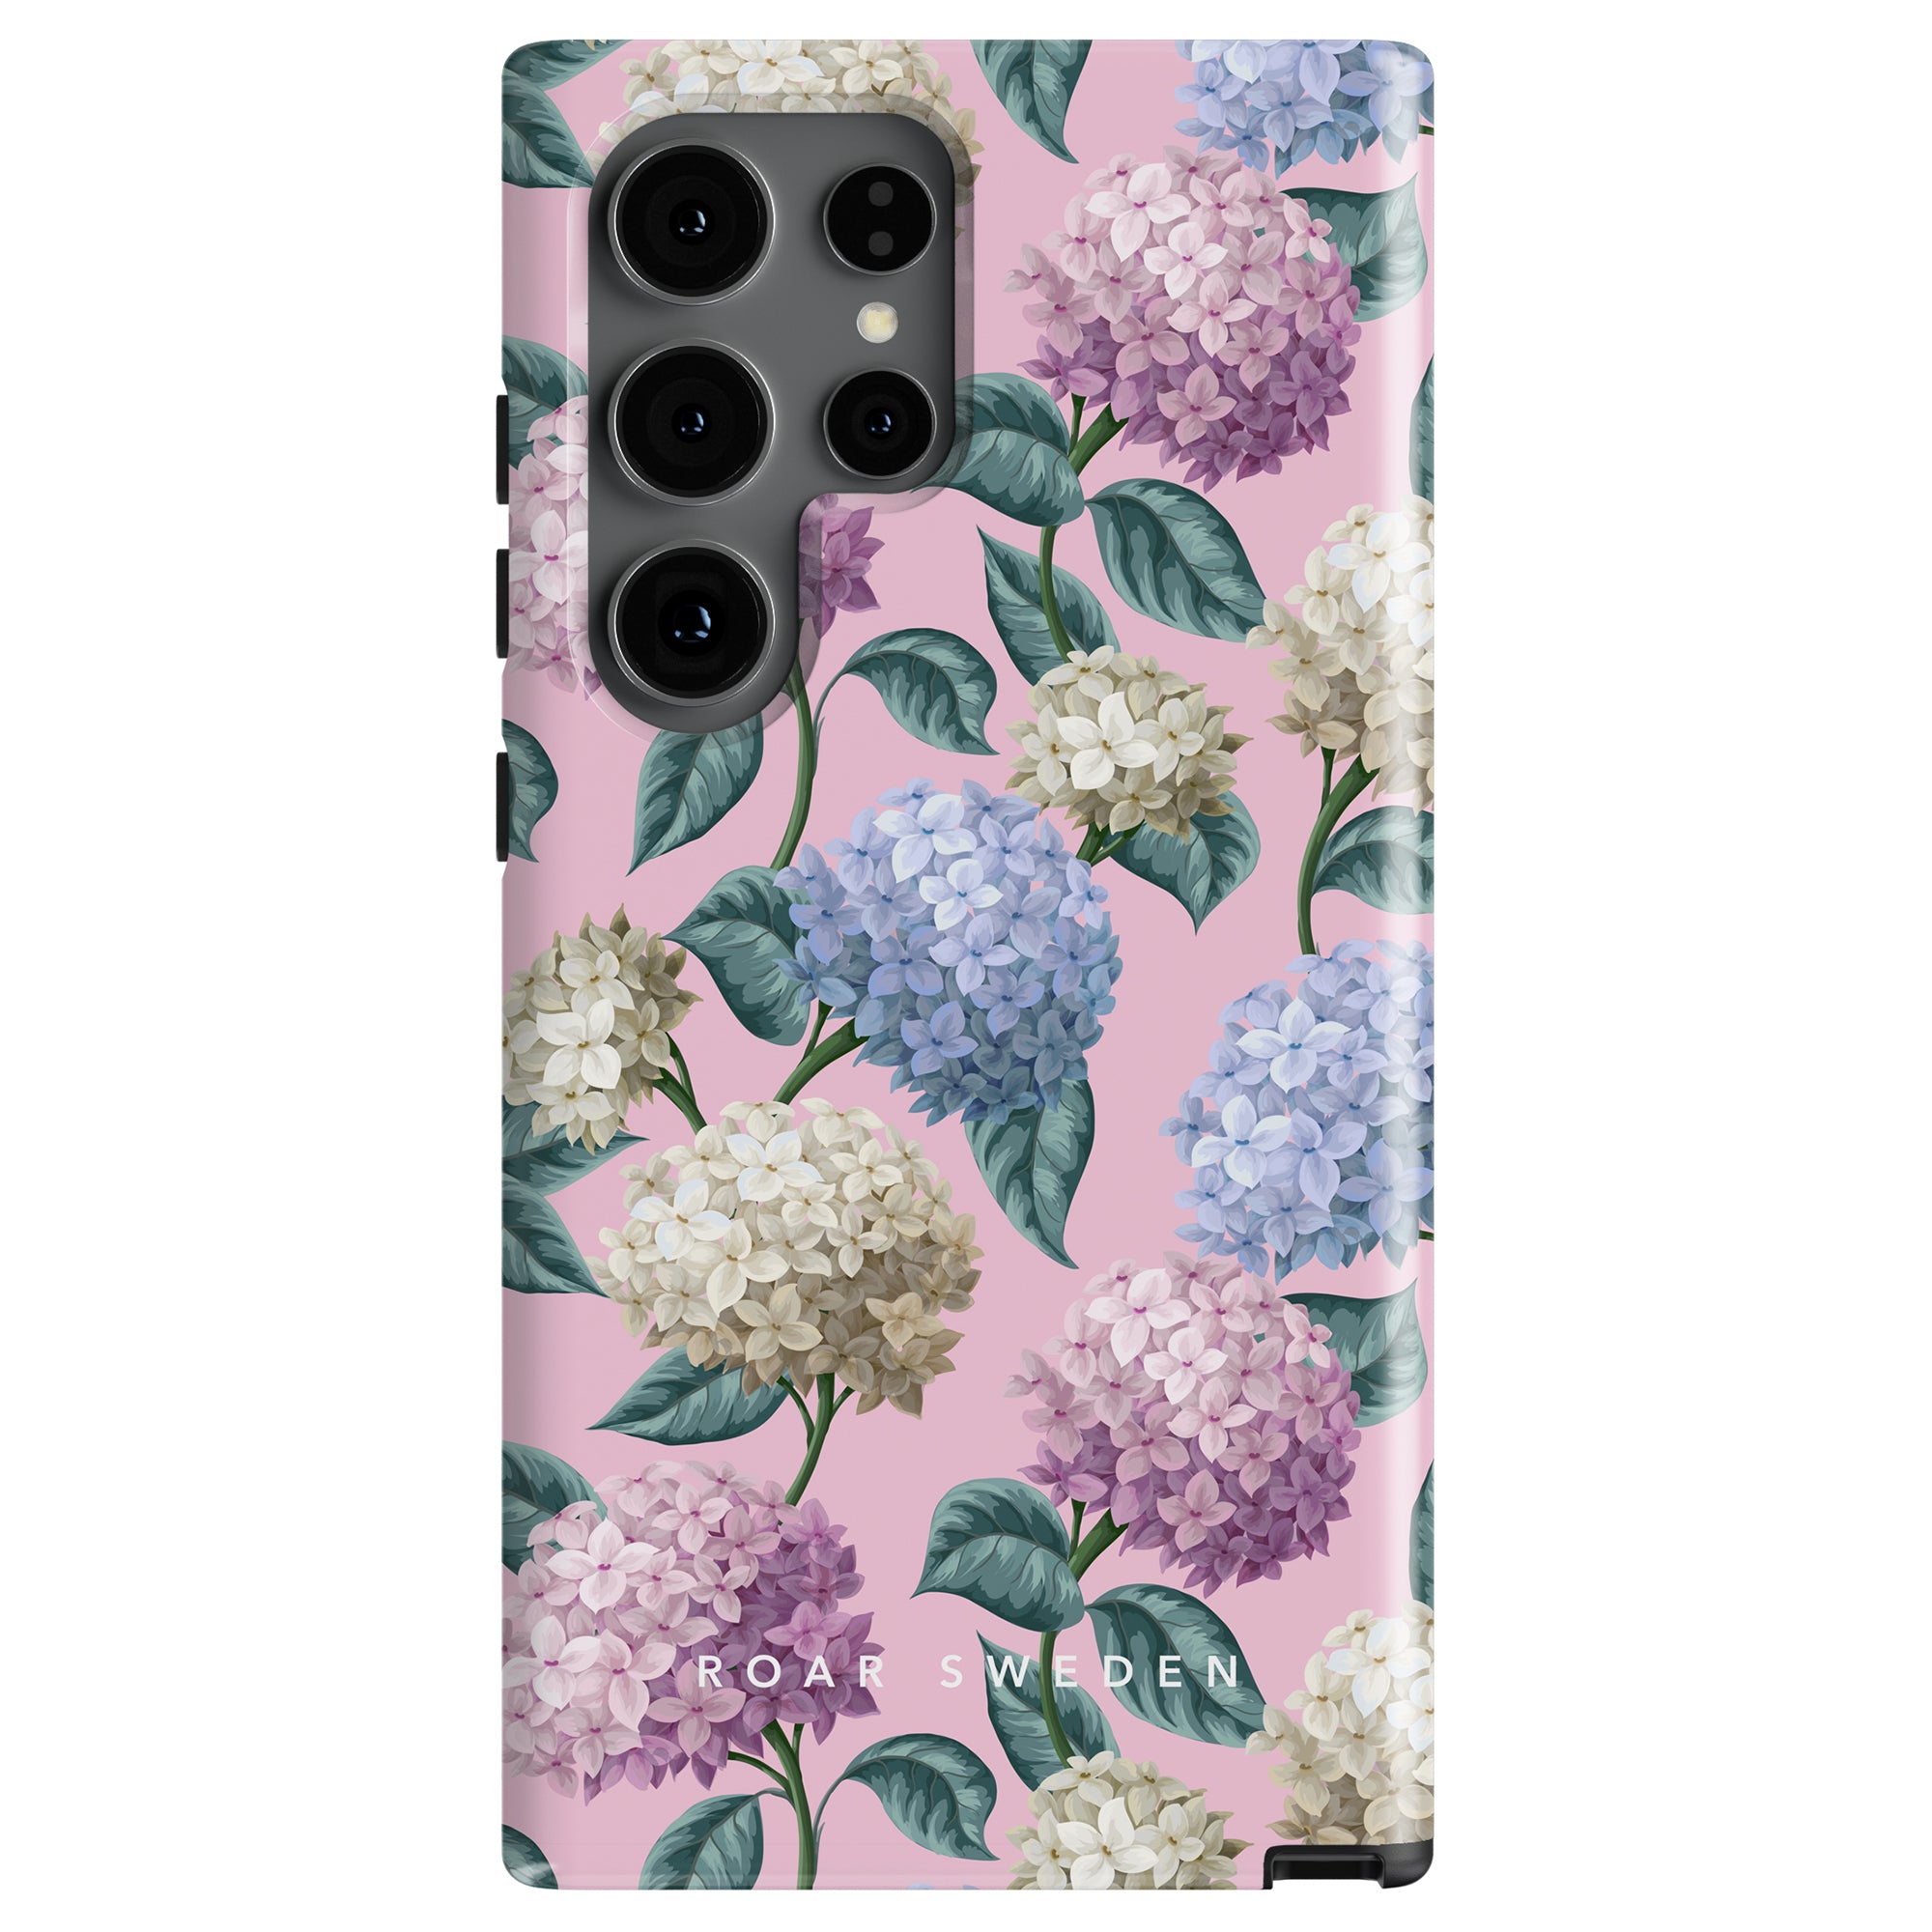 A smartphone protection case featuring a floral pattern with hydrangeas in blue, purple, and cream colors on a pink background. Part of the Hydrangea - Tough Case Summer Collection, the words "ROAR SWEDEN" are written at the bottom center.